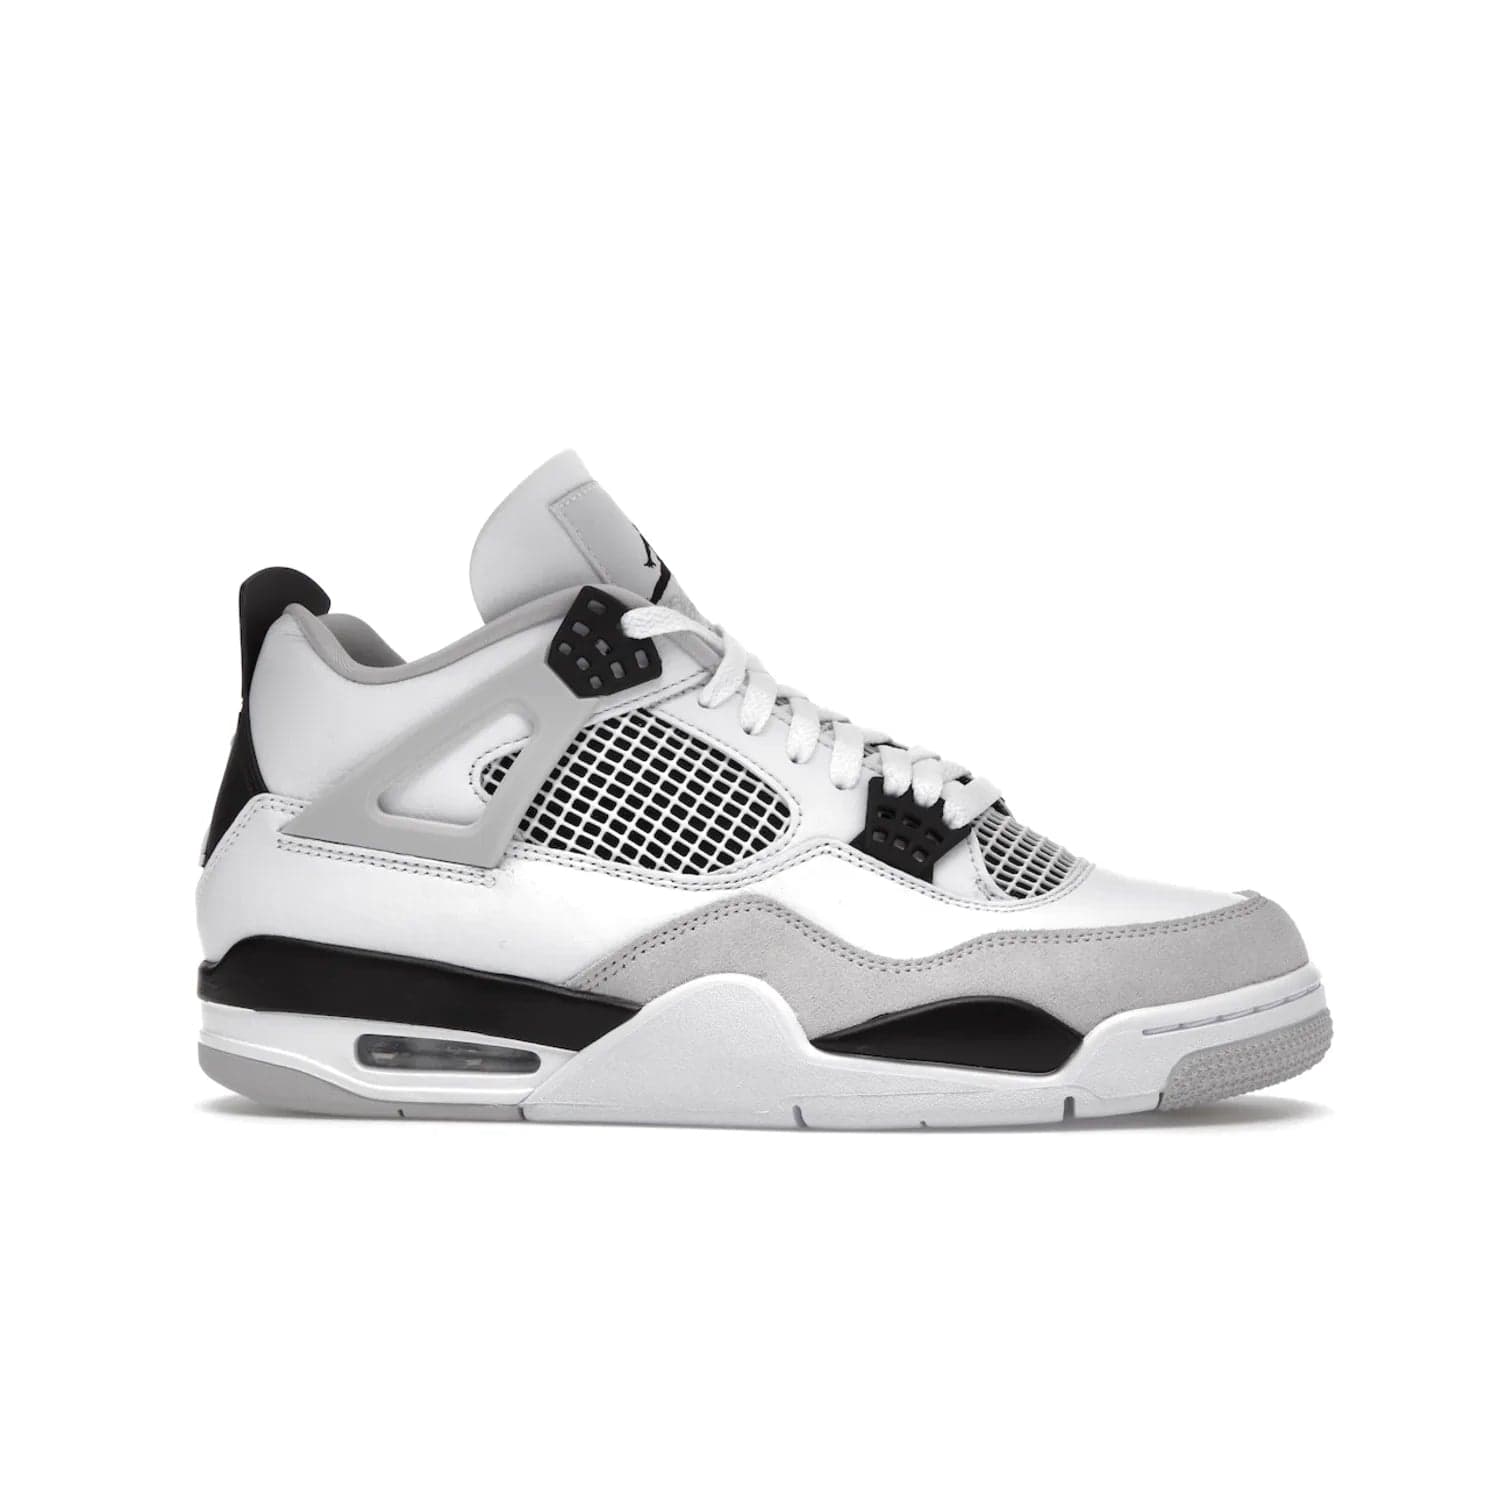 Jordan 4 Retro Military Black - Image 2 - Only at www.BallersClubKickz.com - Updated Air Jordan 4 style with a white/black/light grey sole and visible Air unit. Released in May 2022, offering timeless classic style and comfort.